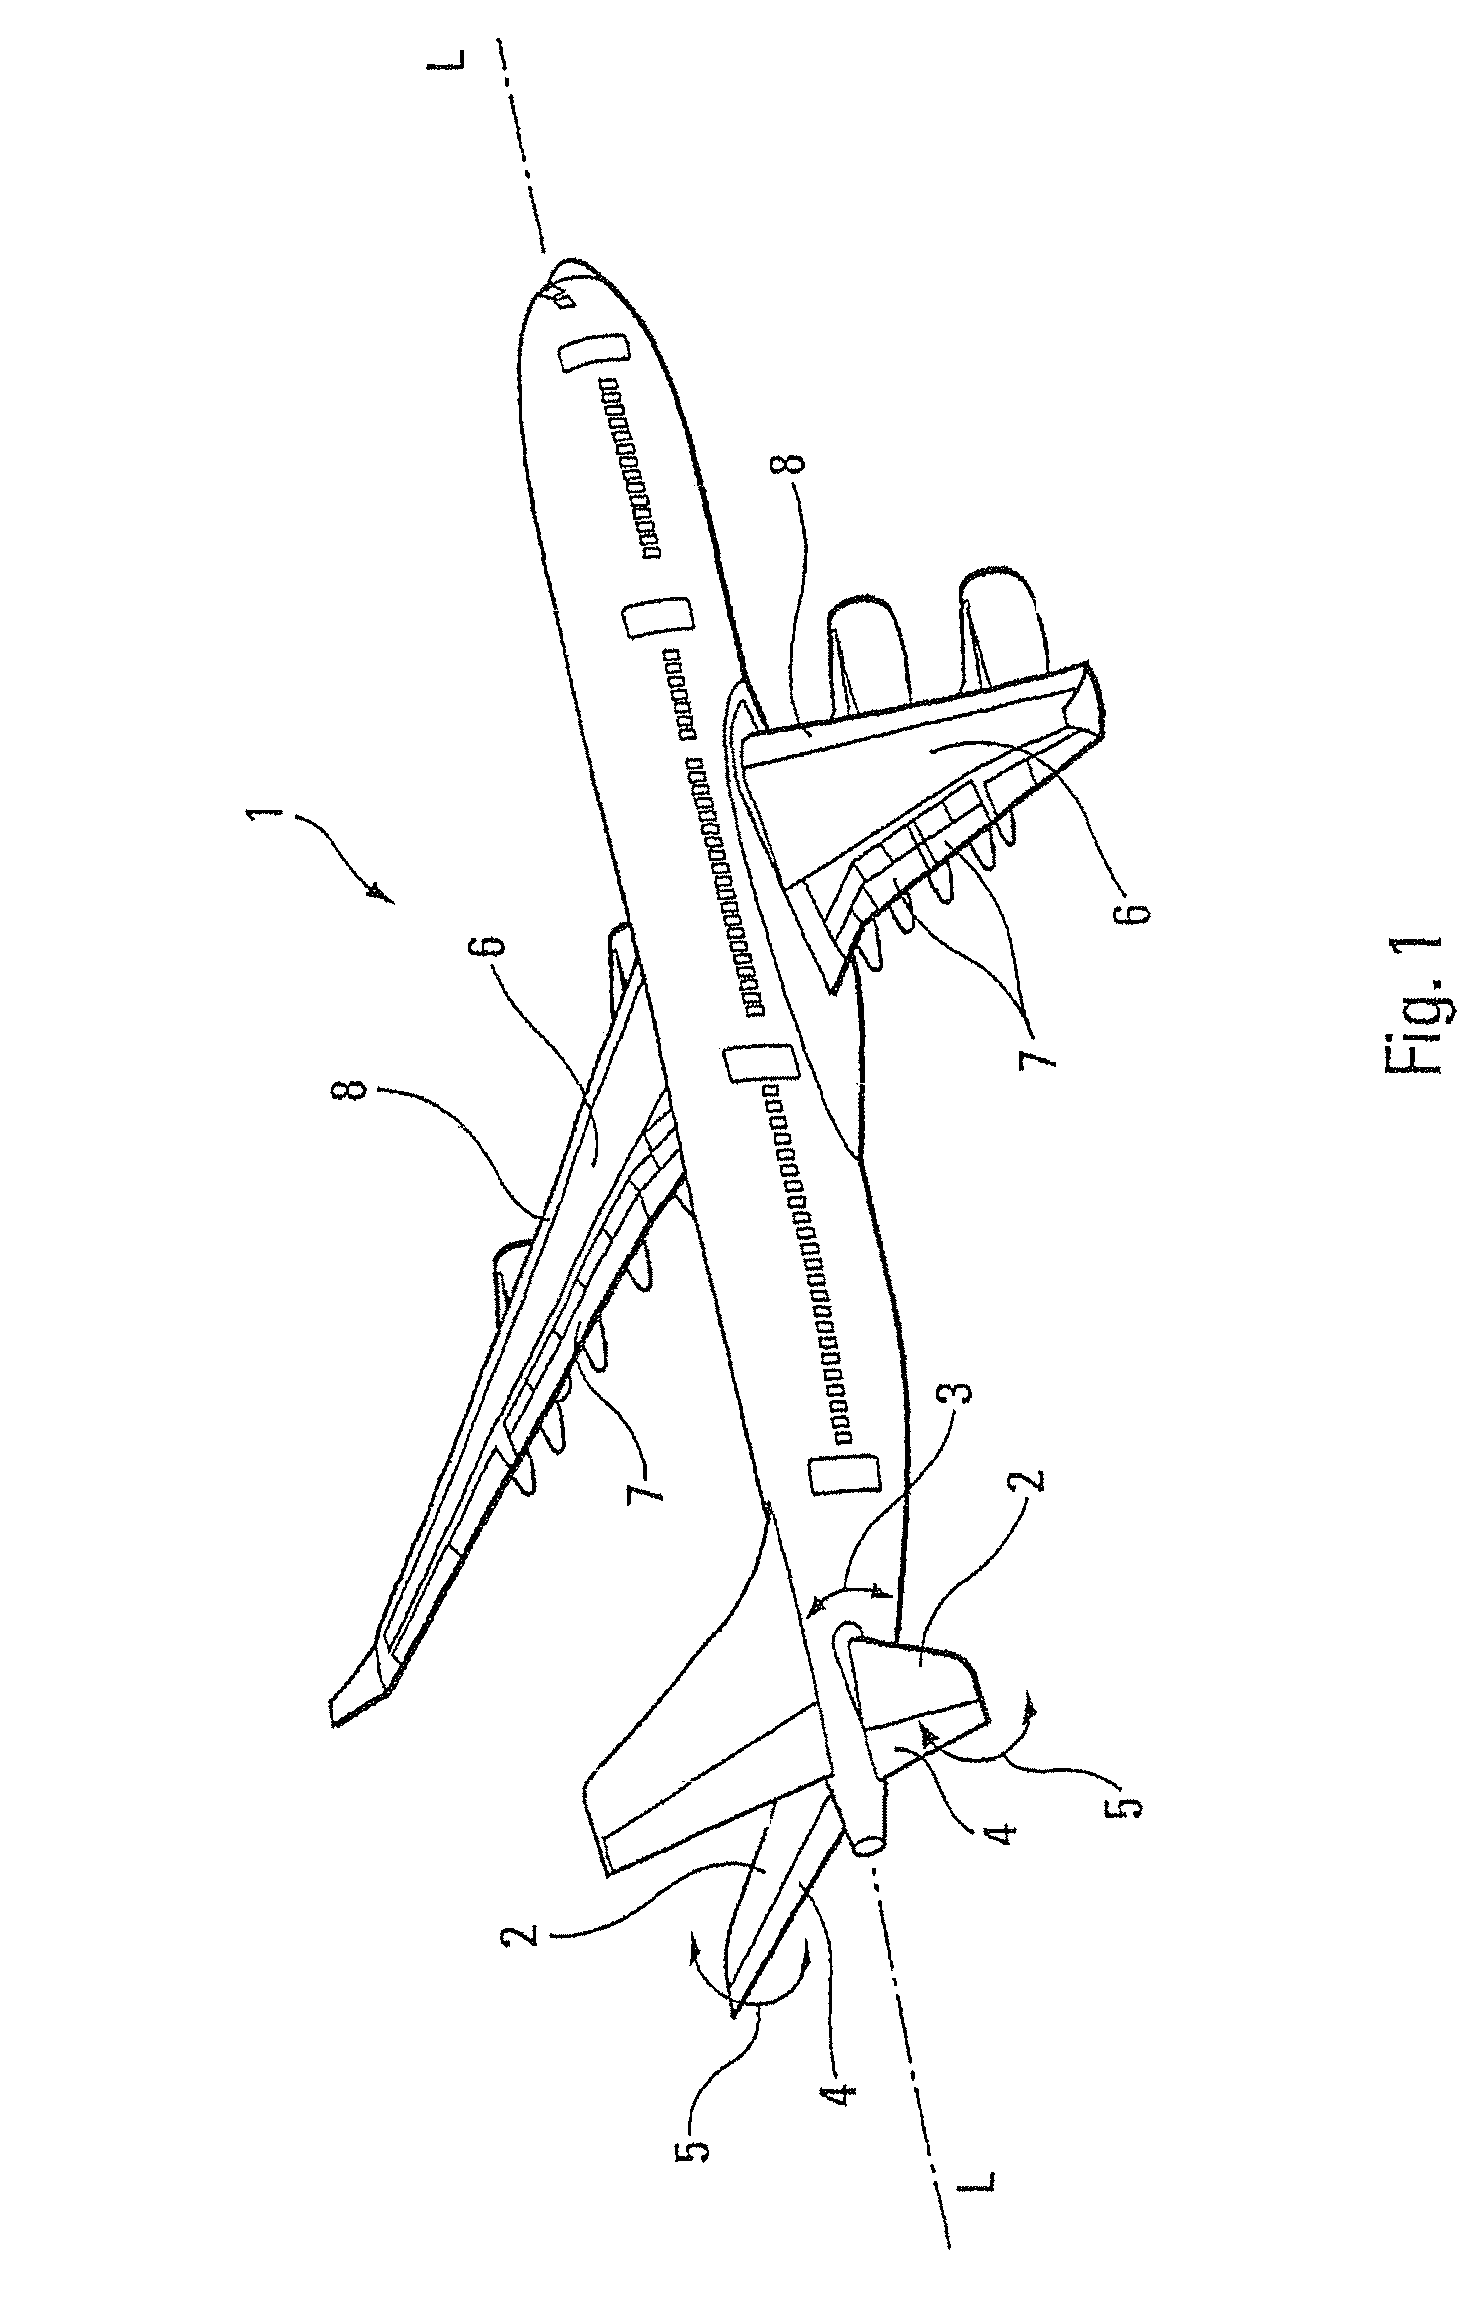 Assisted take-off method for aircraft